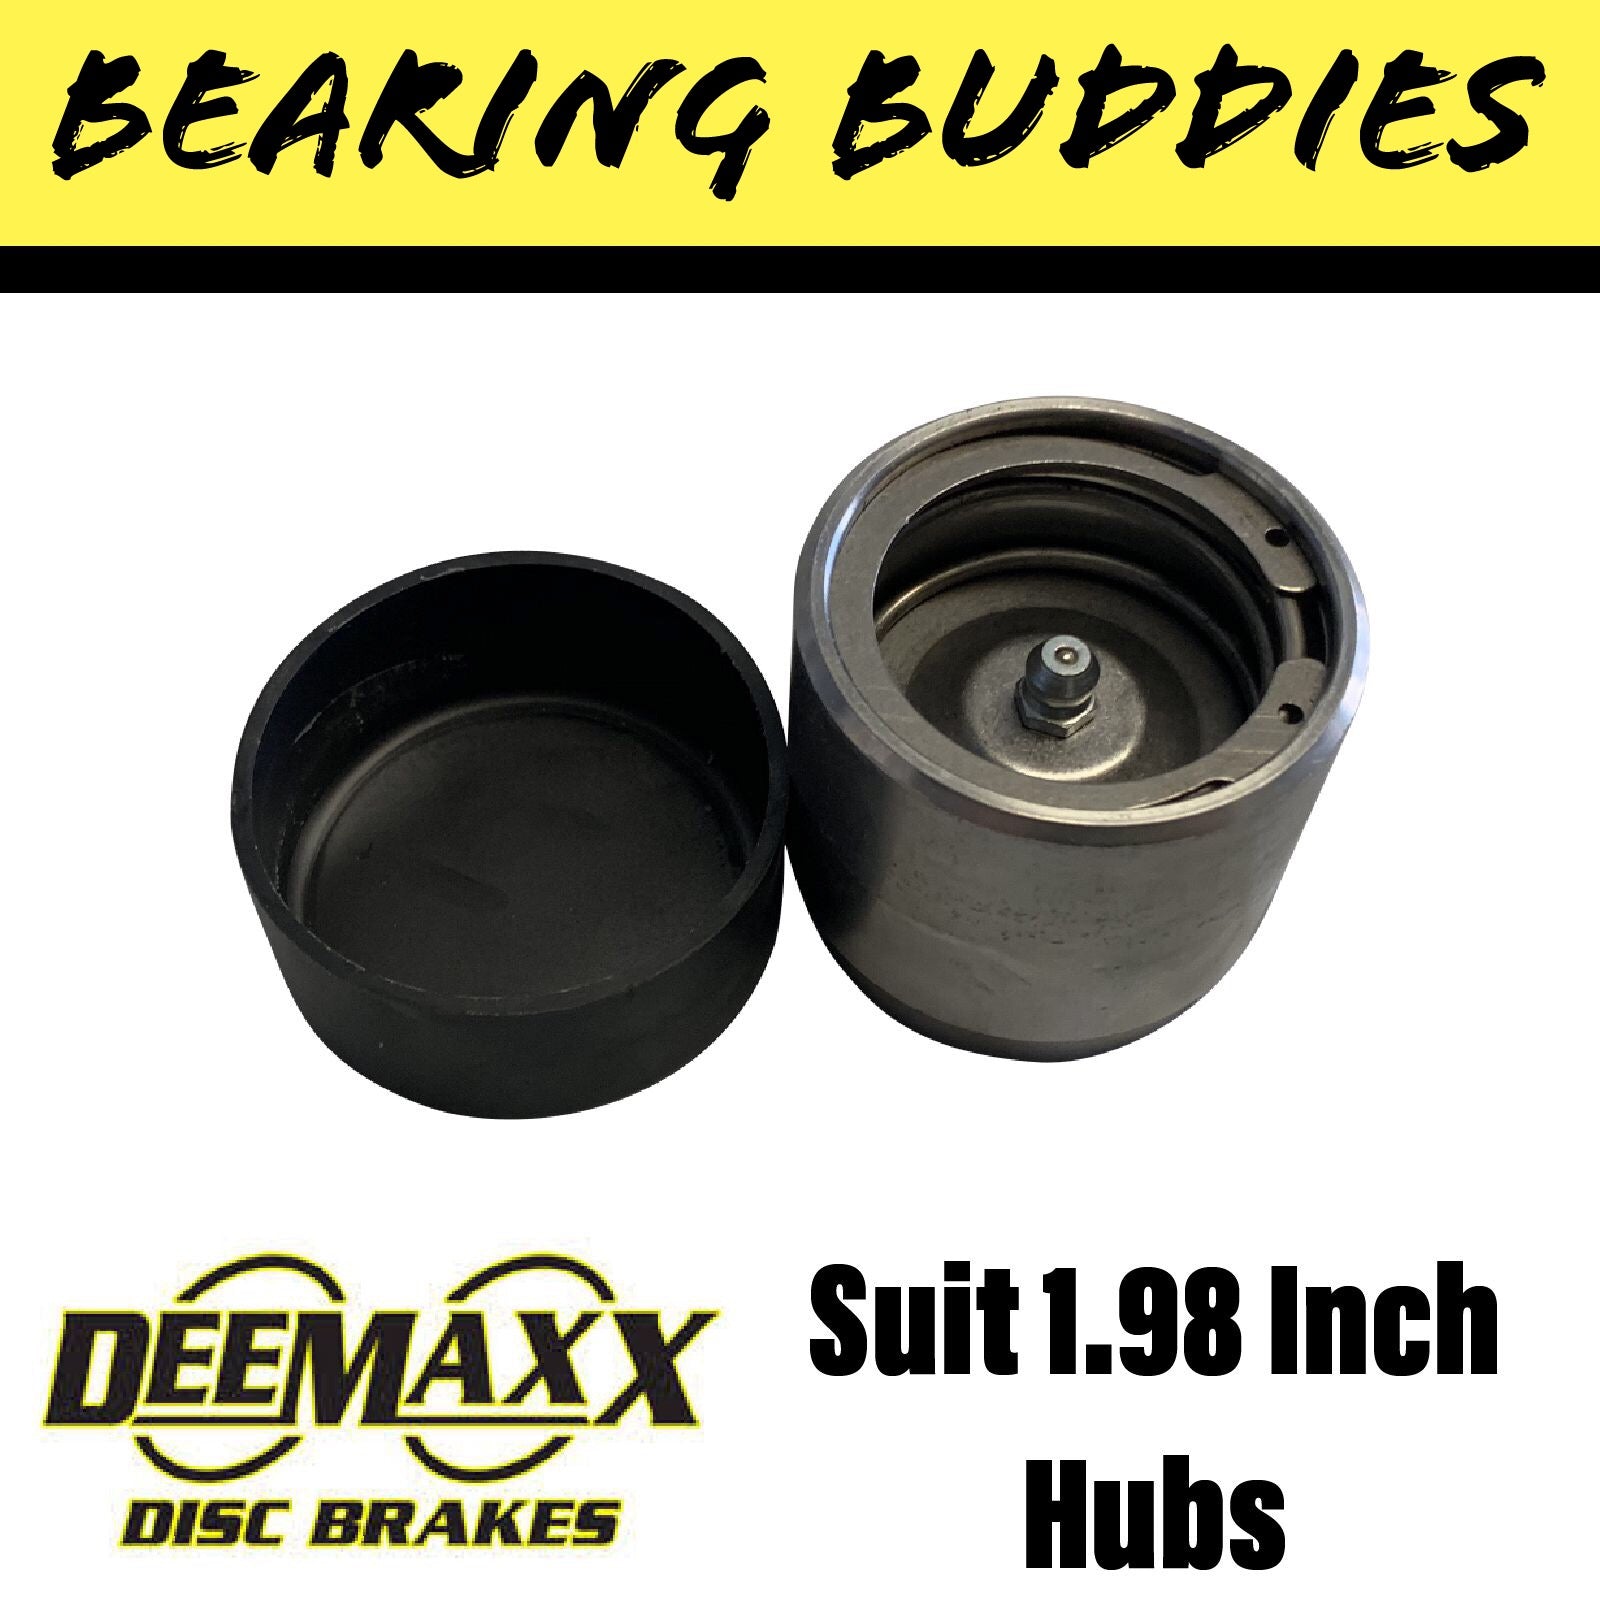 STAINLESS STEEL Bearing Buddy 1.98 Inch